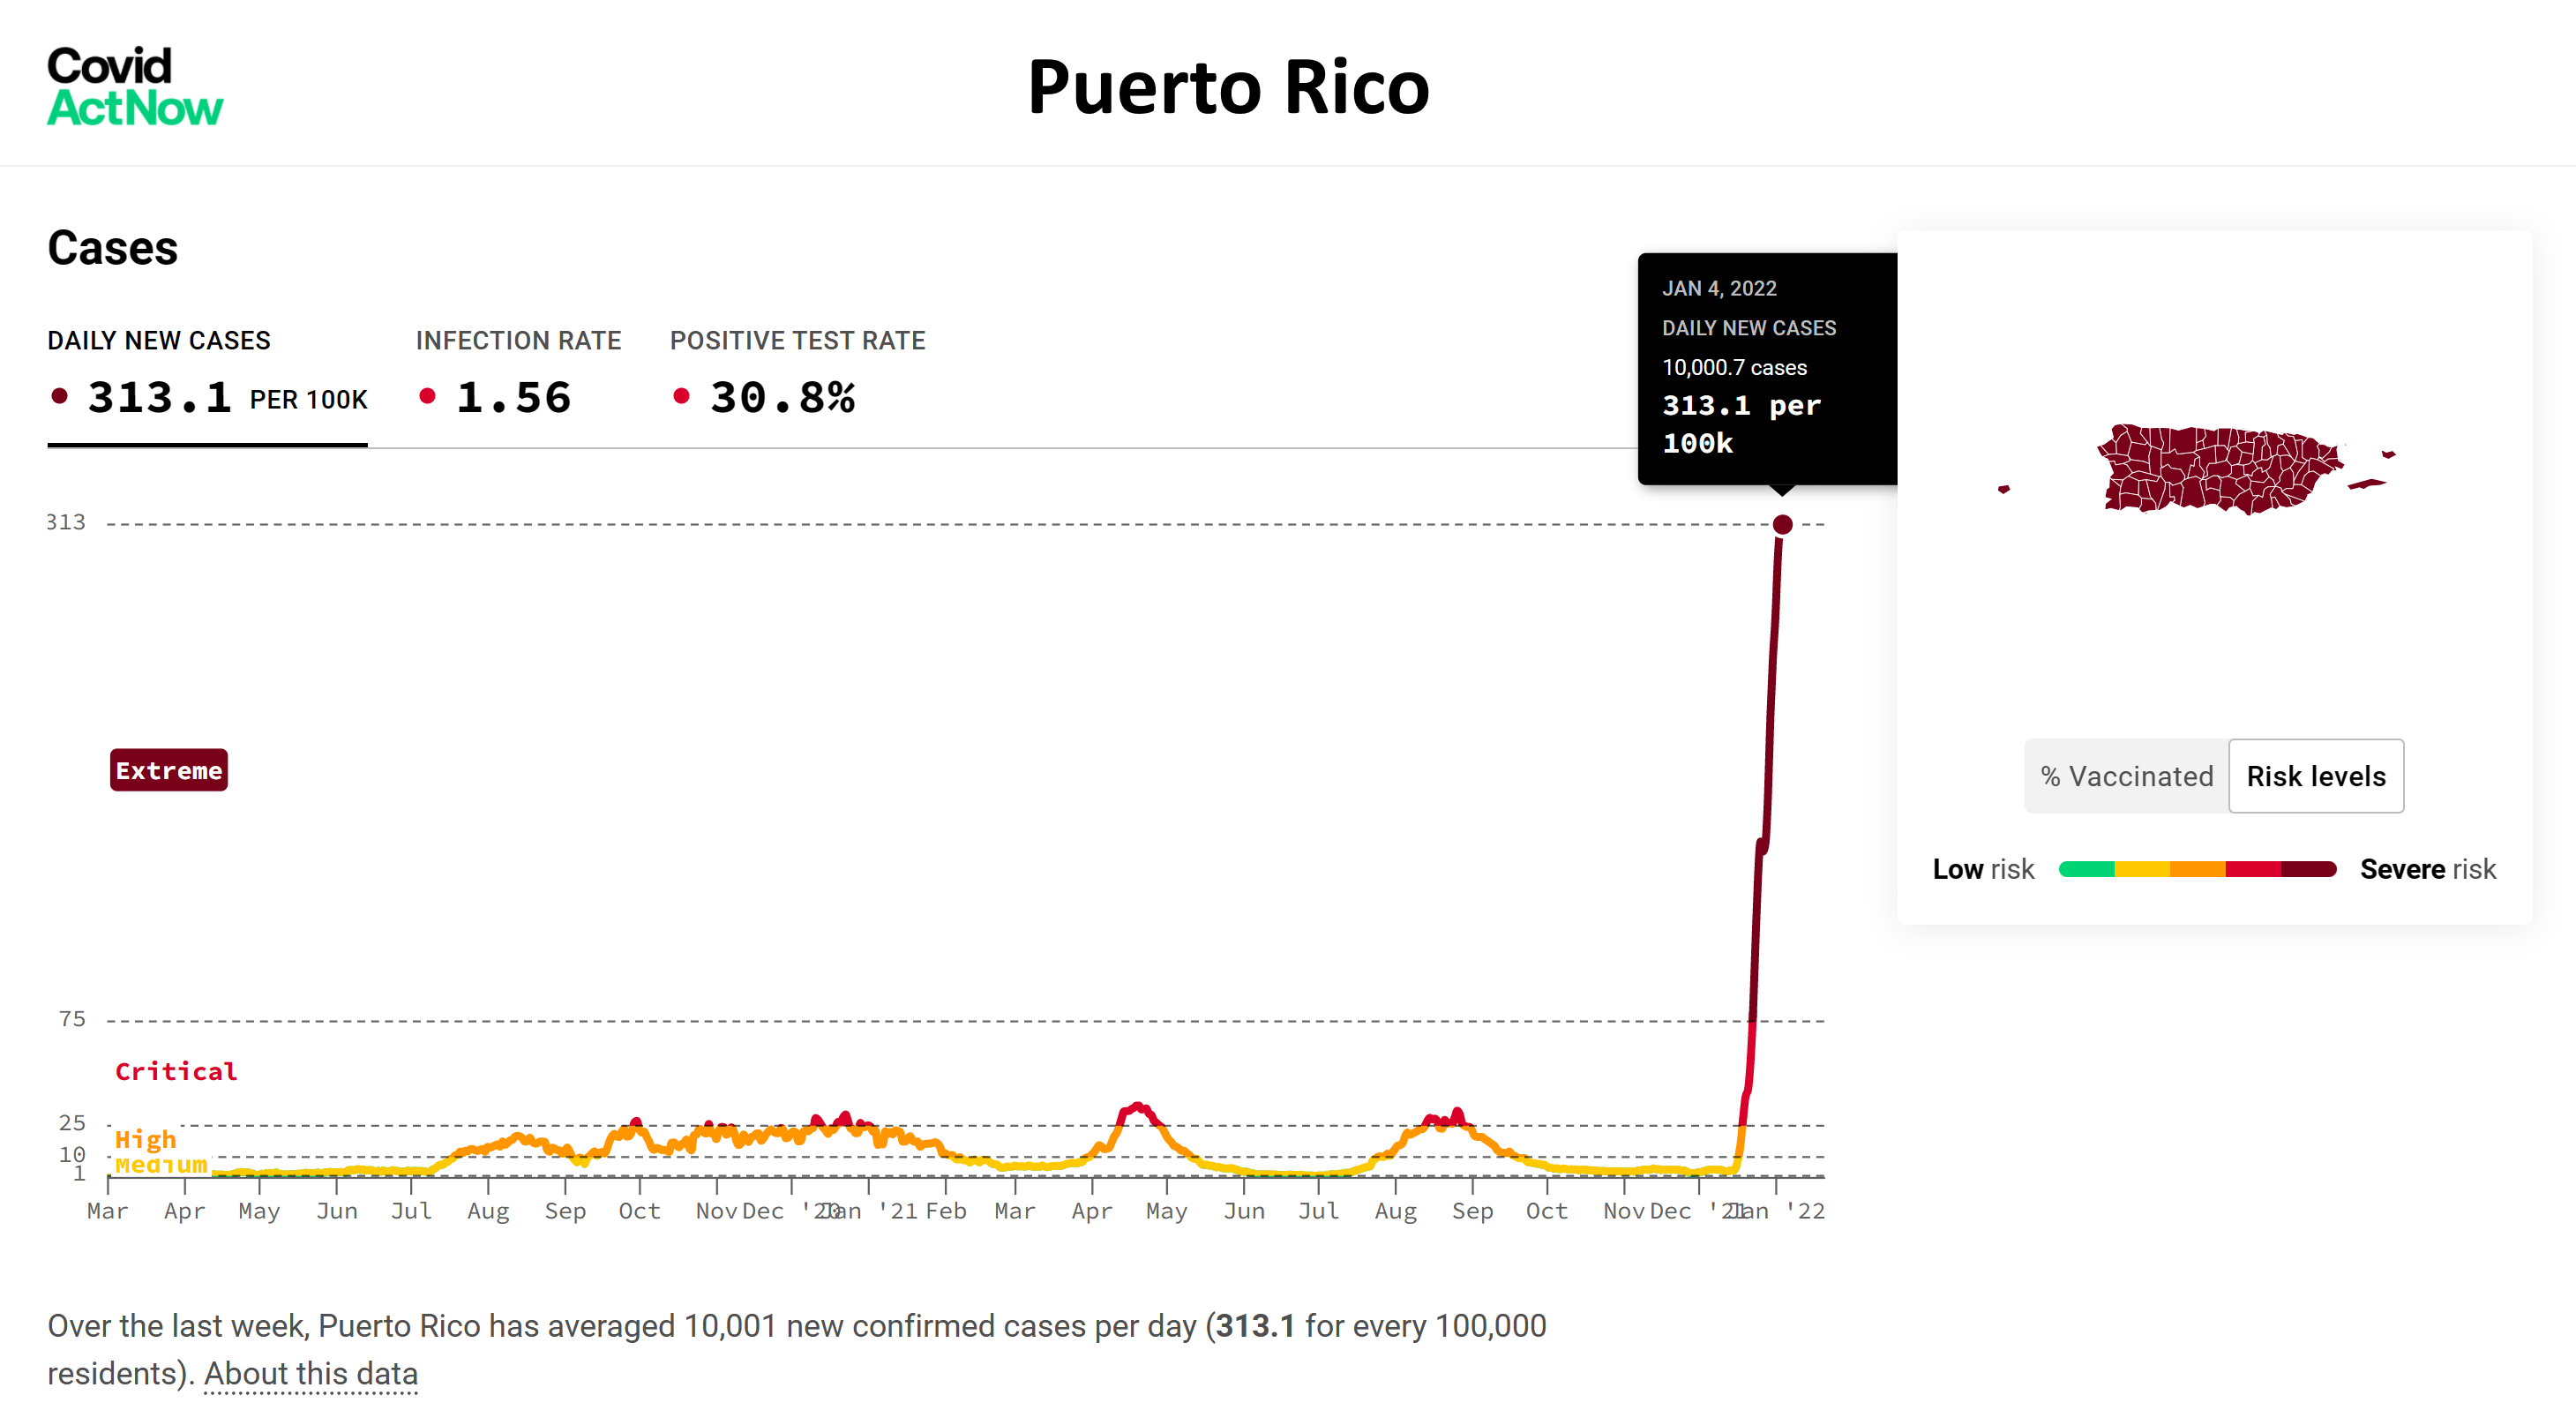 COVID-19 daily cases per 100,000 in Puerto Rico, 4 January 2022. Graphic: Covid Act Now